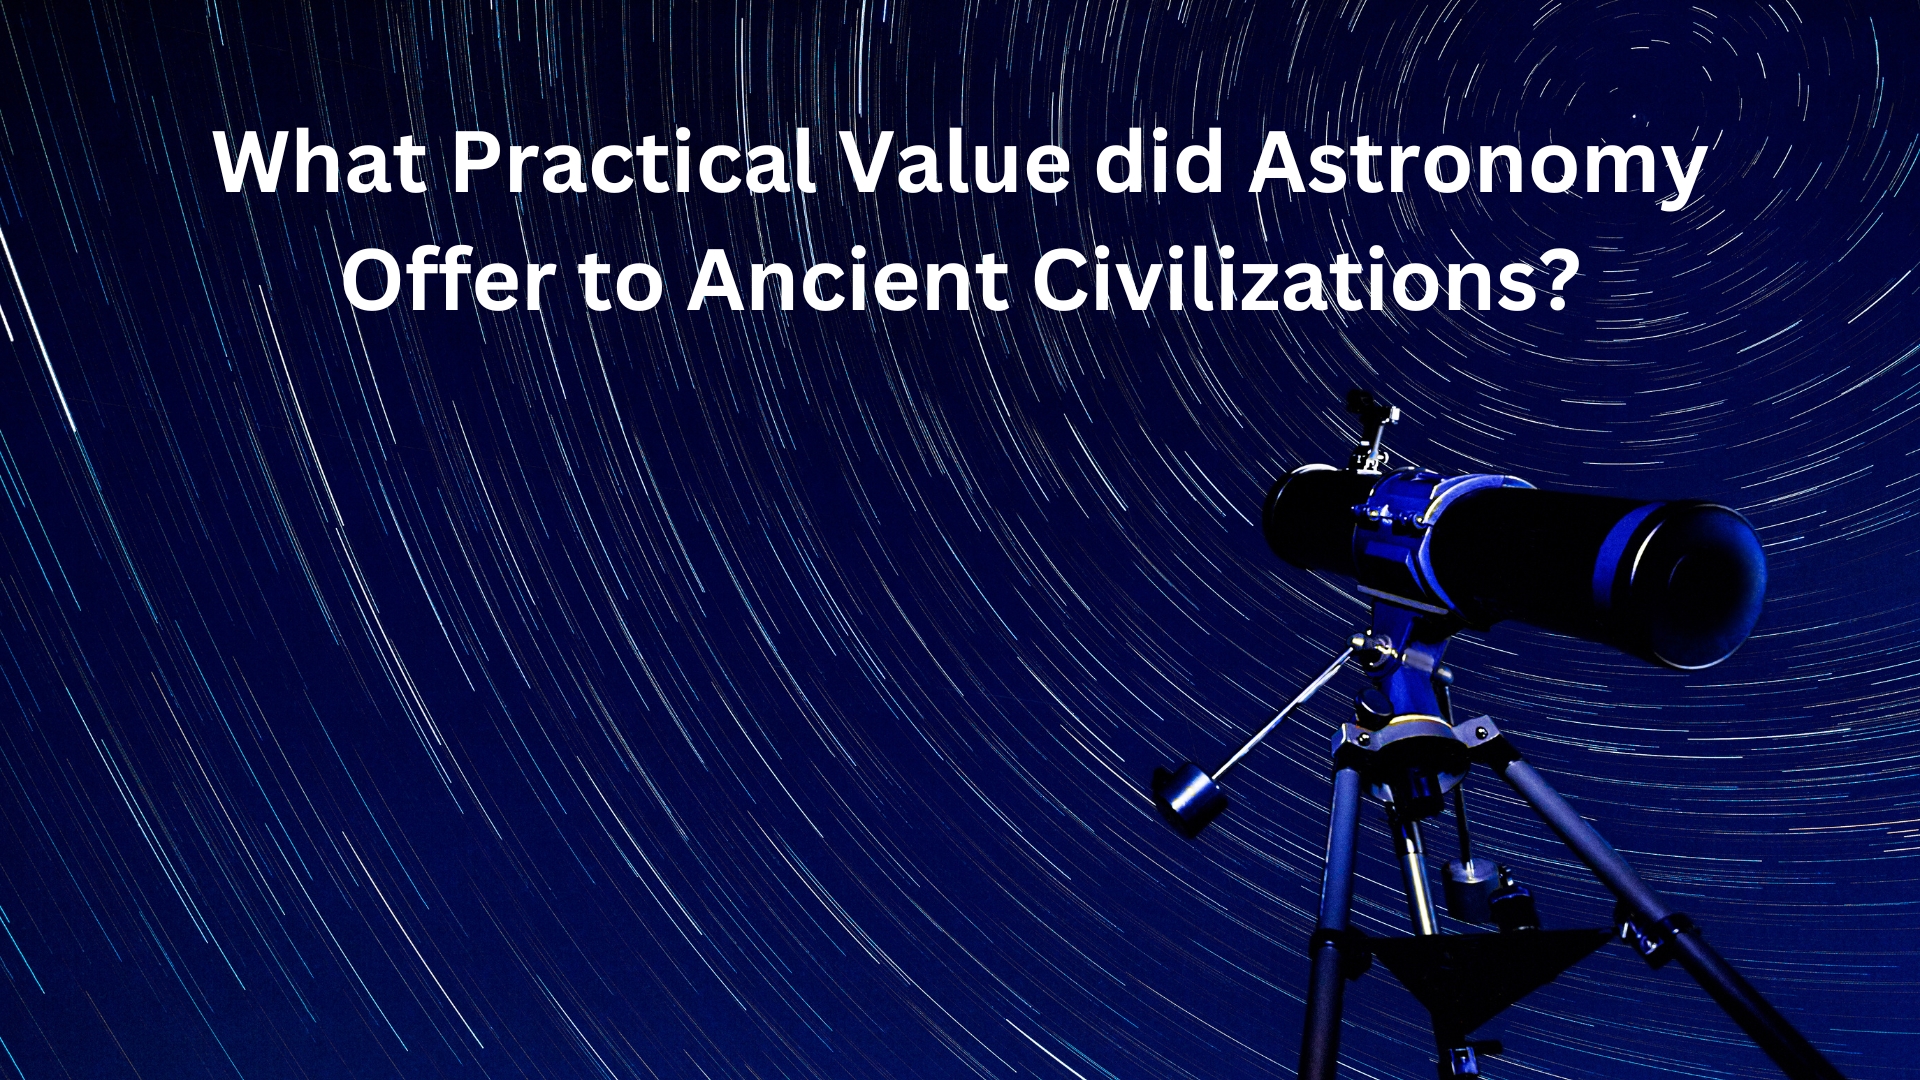 What Practical Value did Astronomy Offer to Ancient Civilizations?